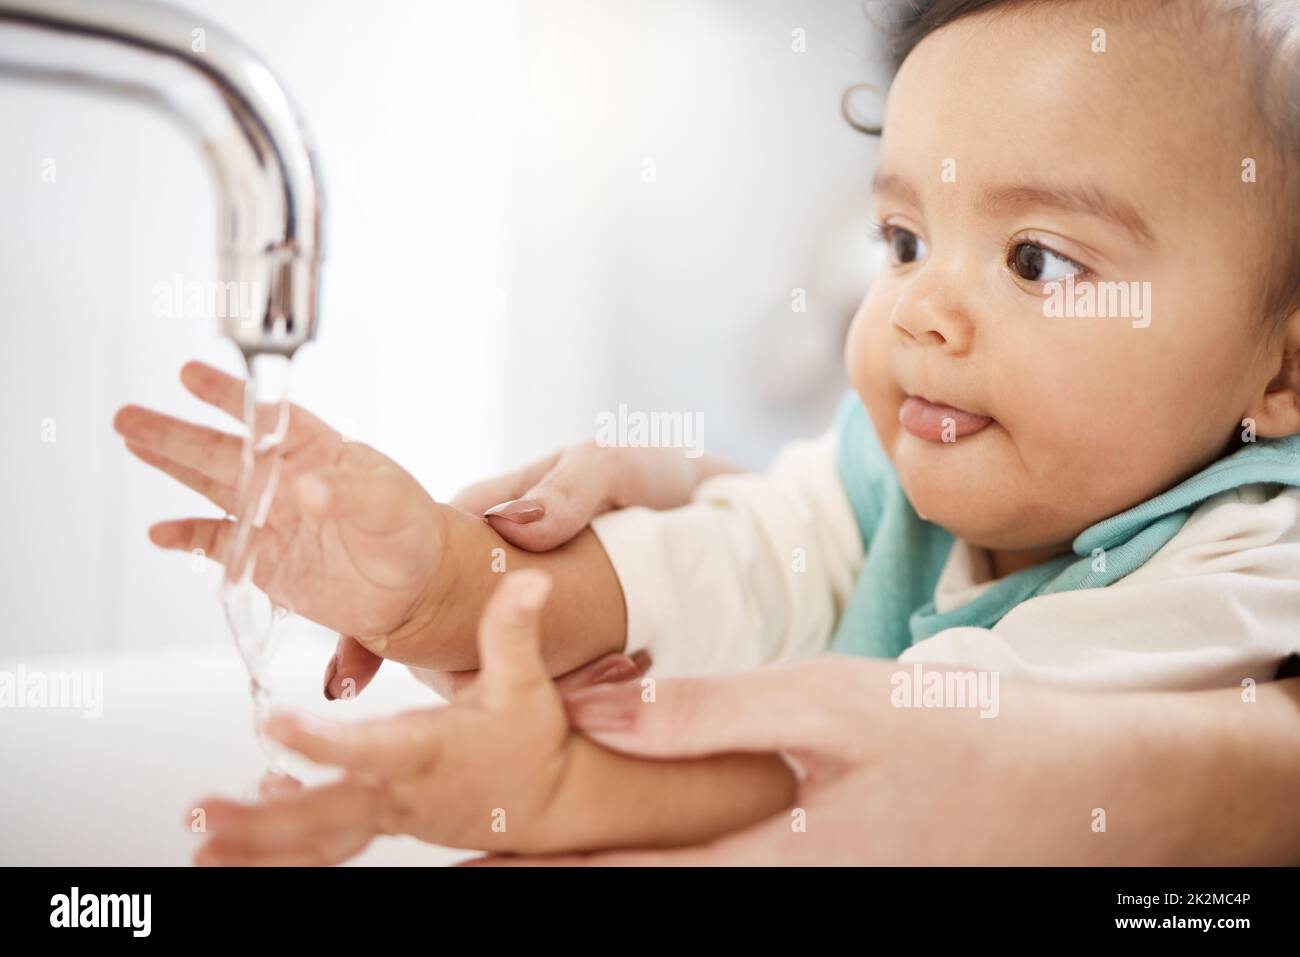 Id much rather drink it. Cropped shot of a woman washing her babys hands. Stock Photo